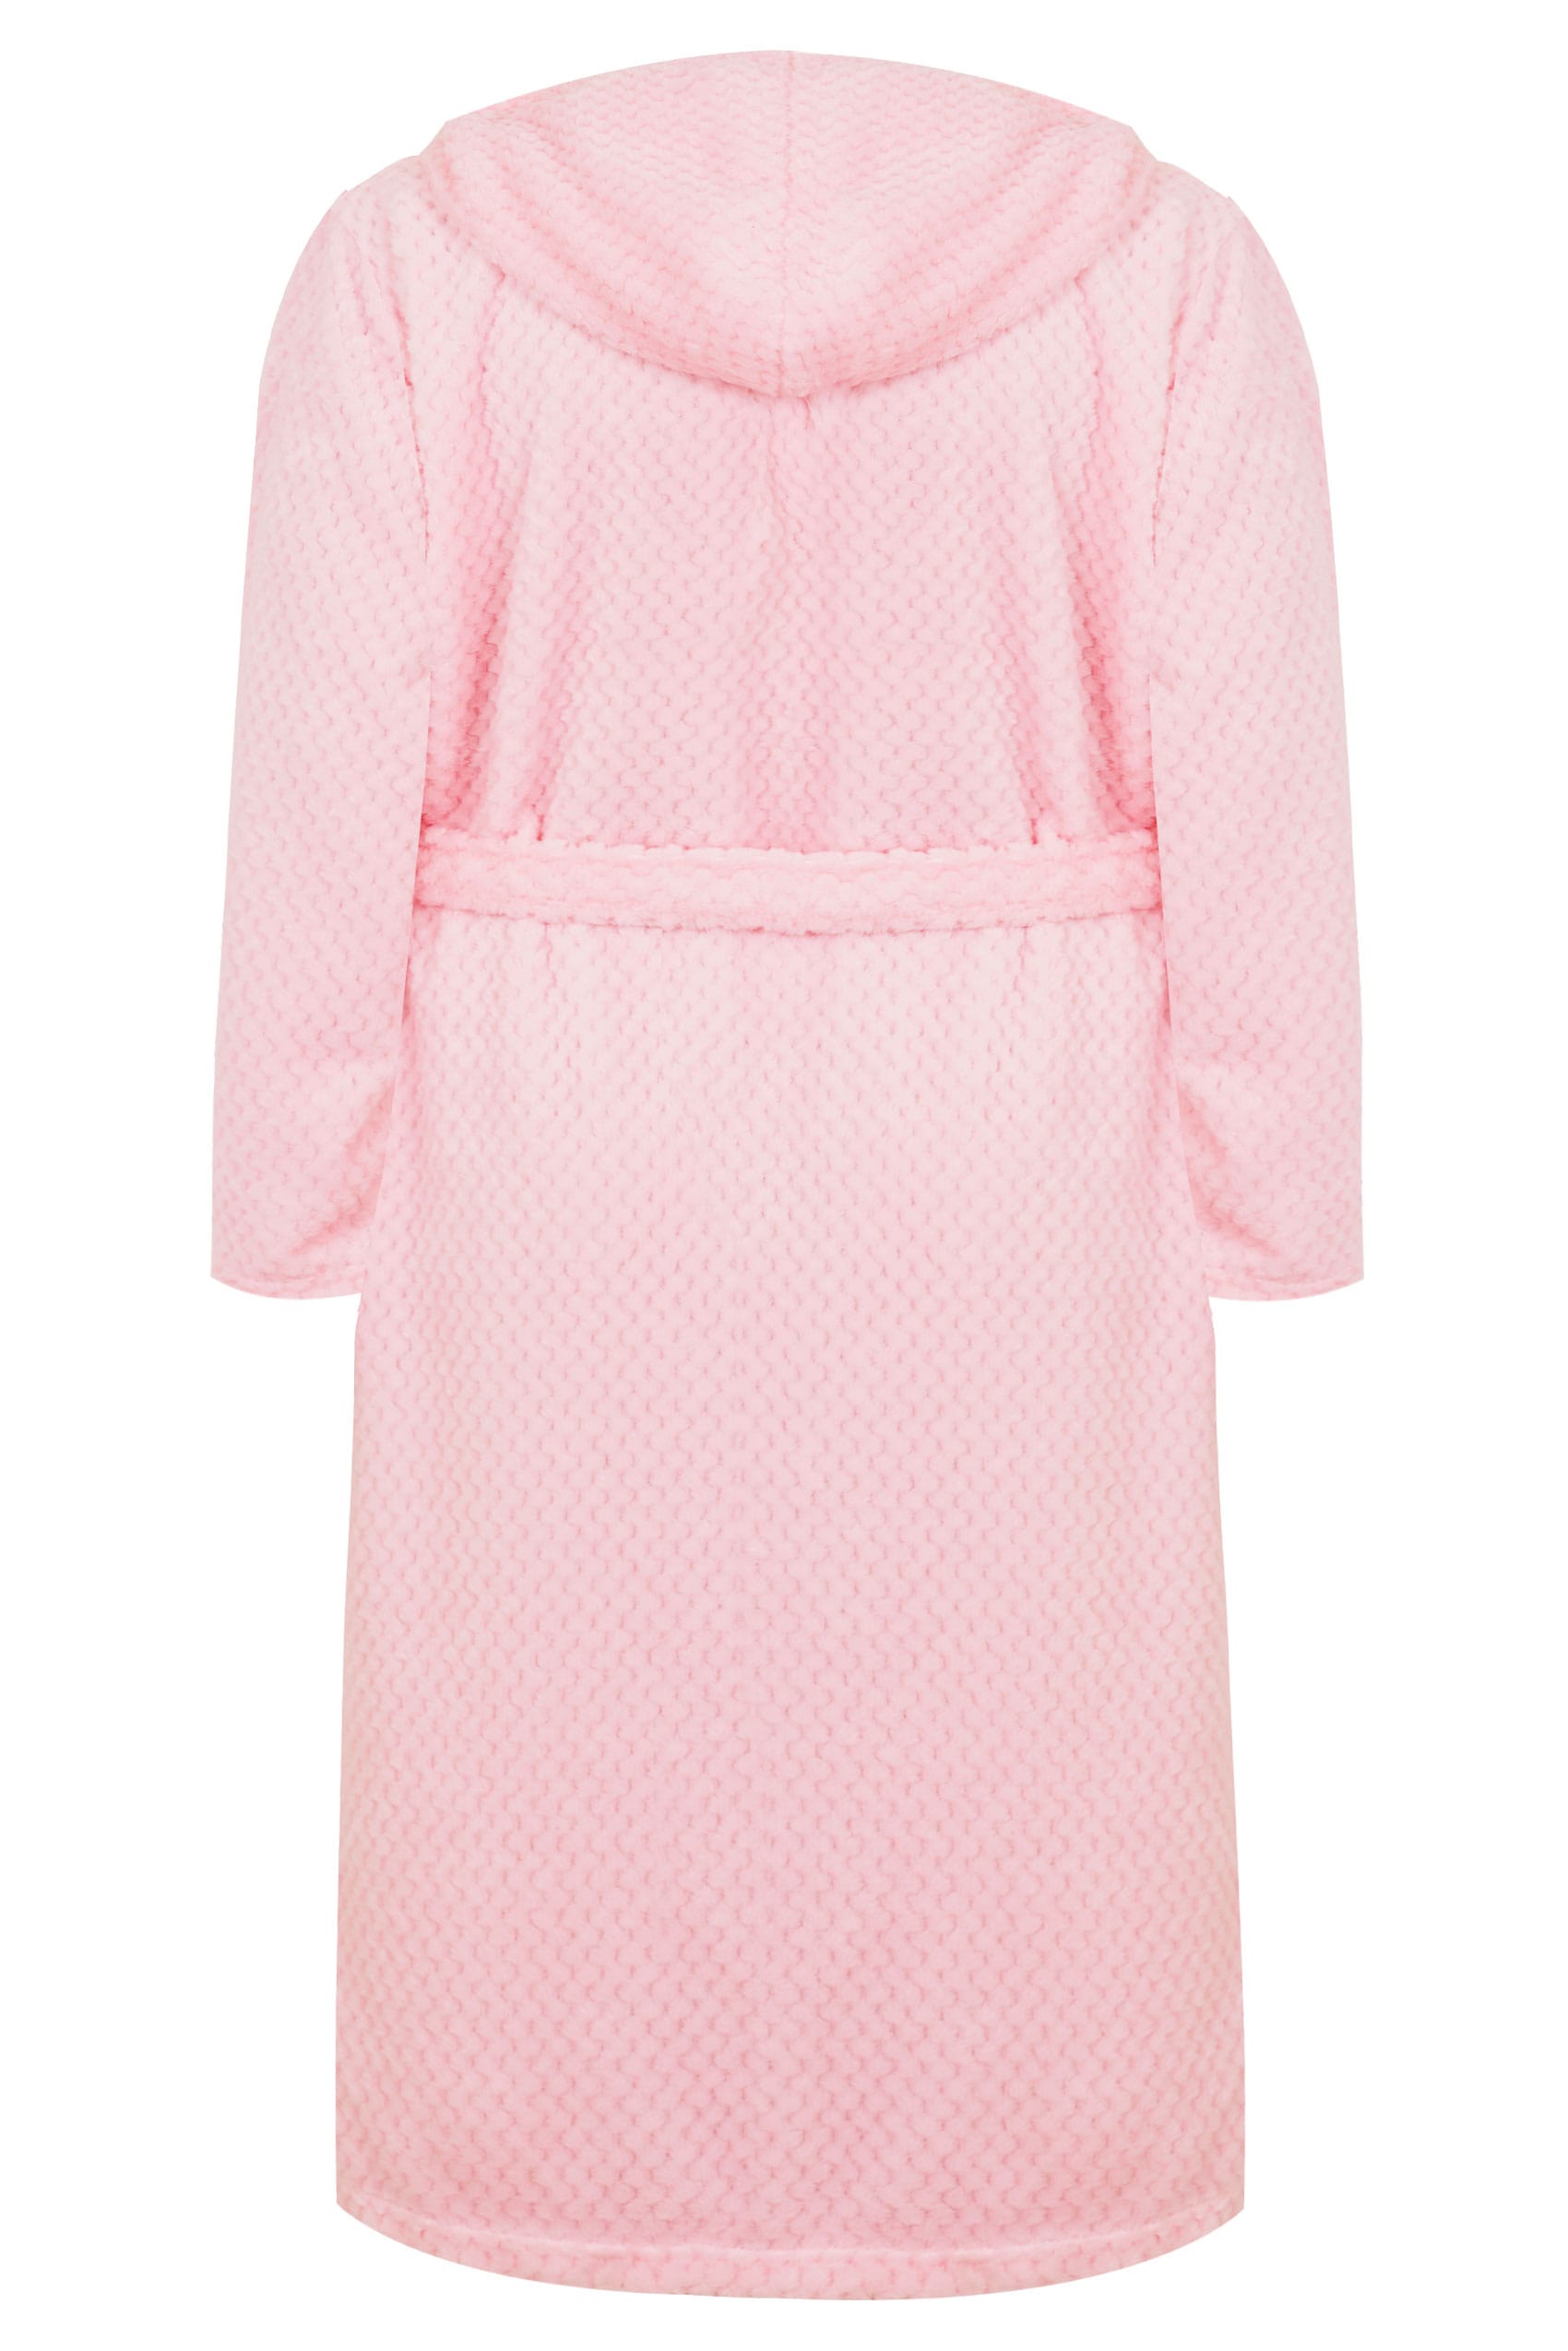 Pink Hooded Fleece Dressing Gown With Pockets, Plus size 16 to 36